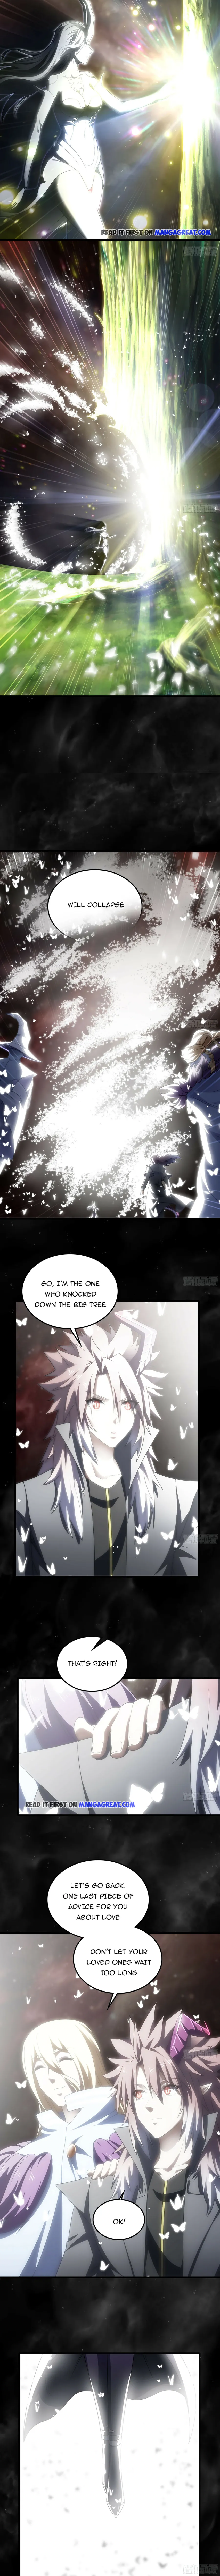 My Wife Is A Demon Queen - Page 2